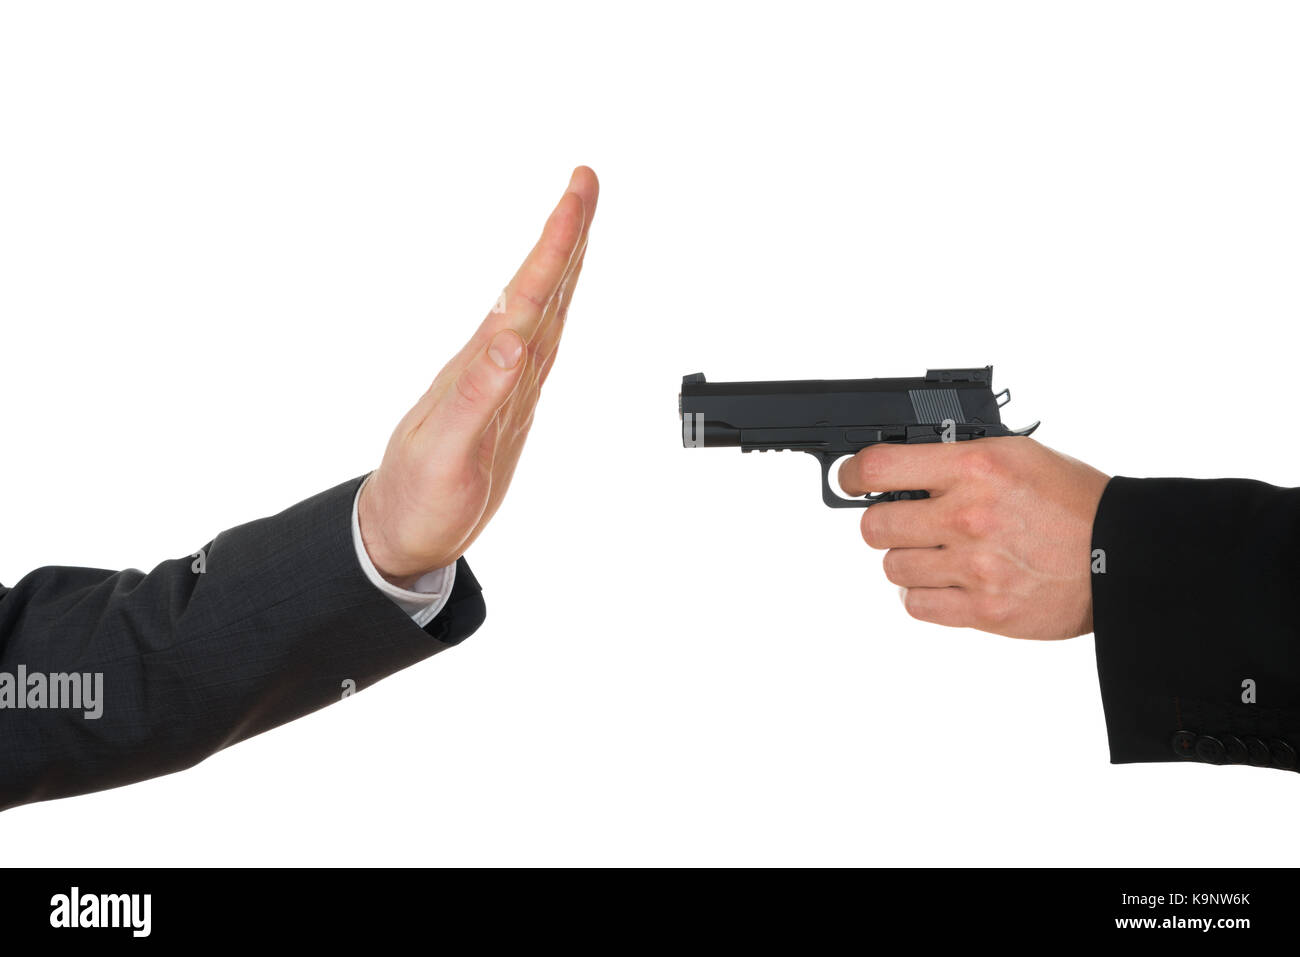 Businessman Hand With Gun Pointing Towards Businessperson Gesturing Stop Sign Over White Background Stock Photo